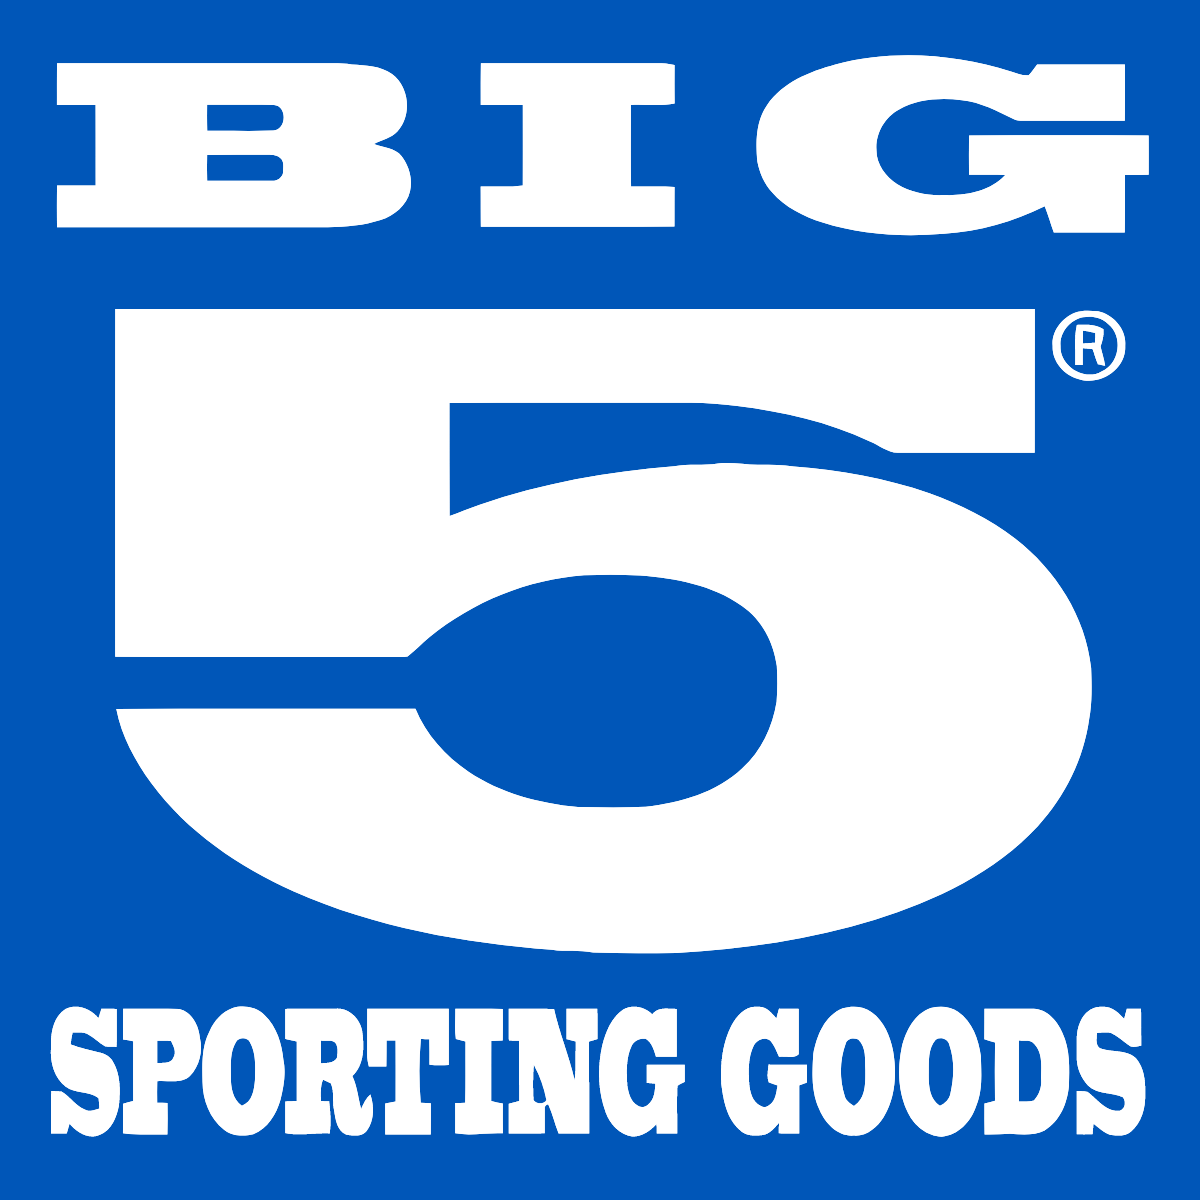 Big 5 Sporting Goods logo in transparent PNG and vectorized SVG formats